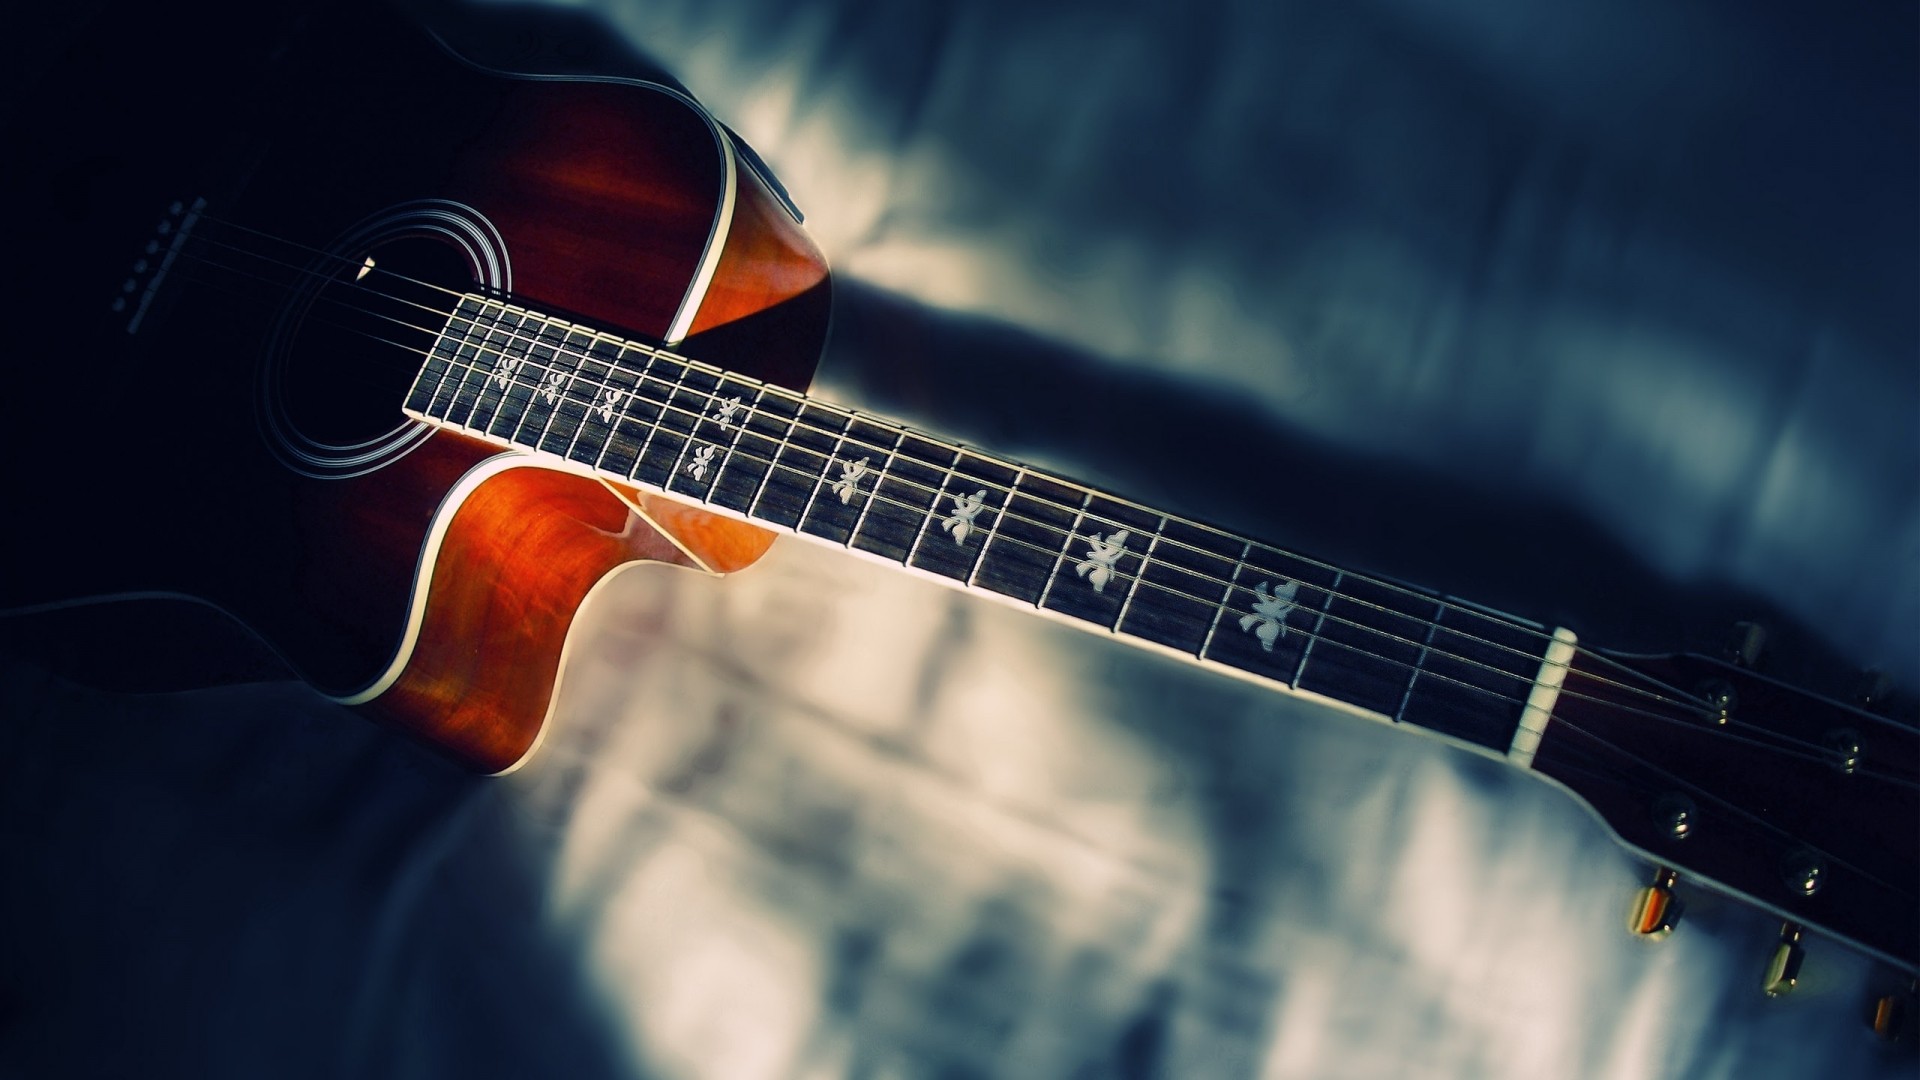 Acoustic Guitar Wallpaper   Wallpaper High Definition High Quality